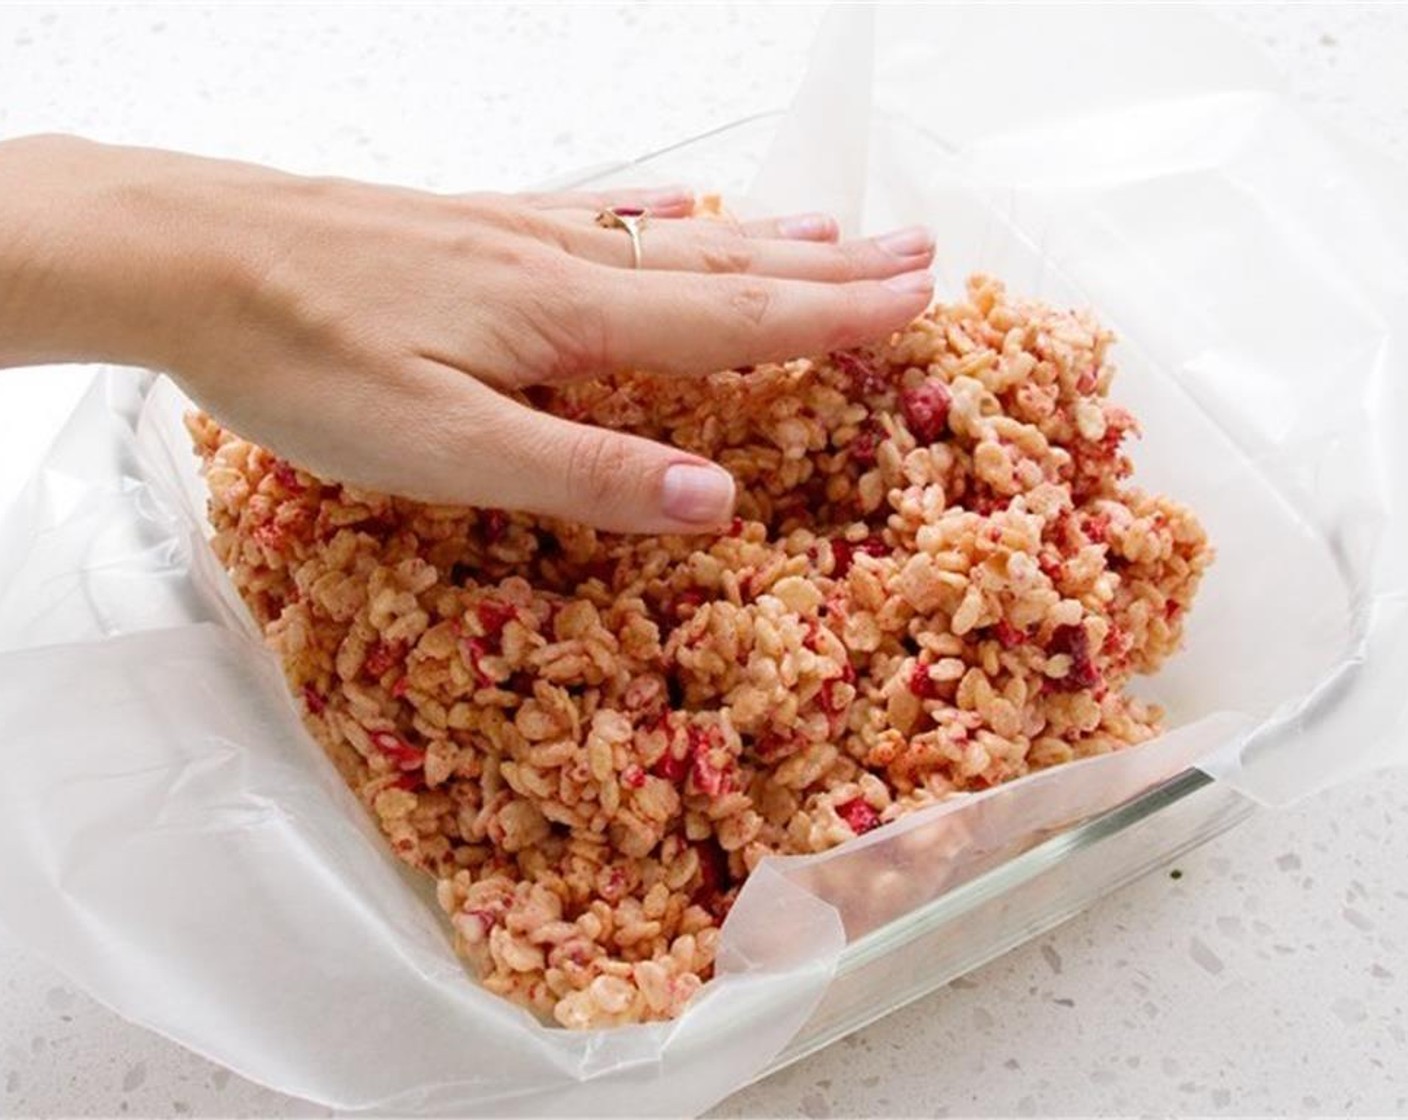 step 4 Quickly grab a spoon or spatula, and spray with Nonstick Cooking Spray (as needed). Use to mix the rice krispie mixture until evenly coated. Pour into prepared pan, and press evenly. Refrigerate 30 minutes to let cool.